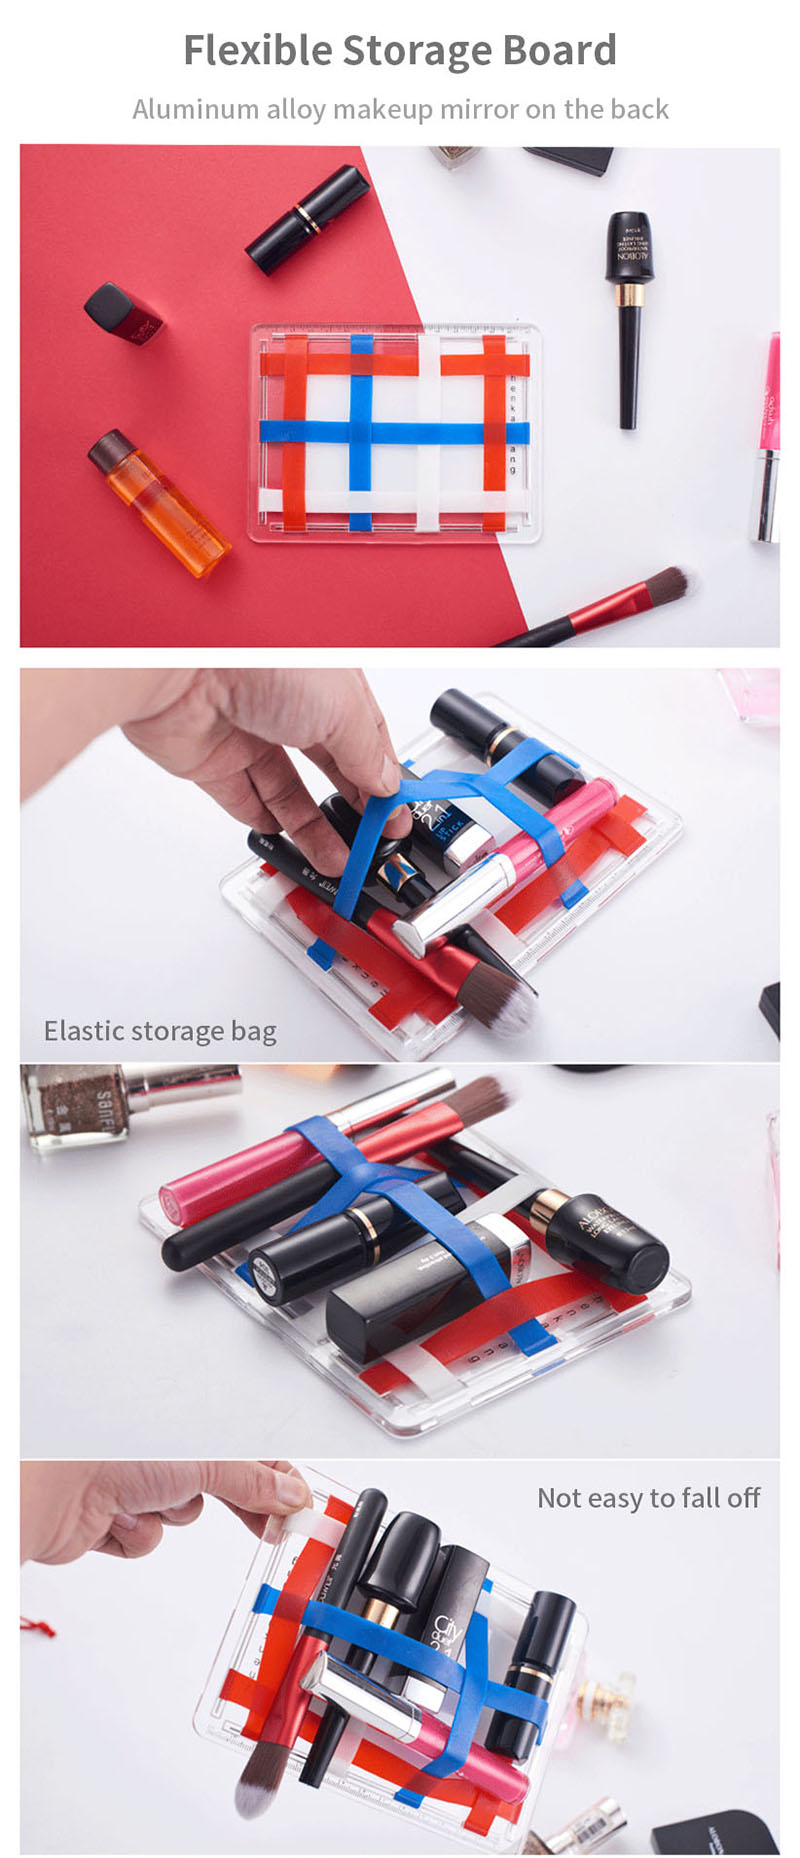 Portable-Transparent-Storage-Board-Cosmetic-Bag-Gift-Creative-With-Makeup-Mirror-Storage-Bag-1432365-1